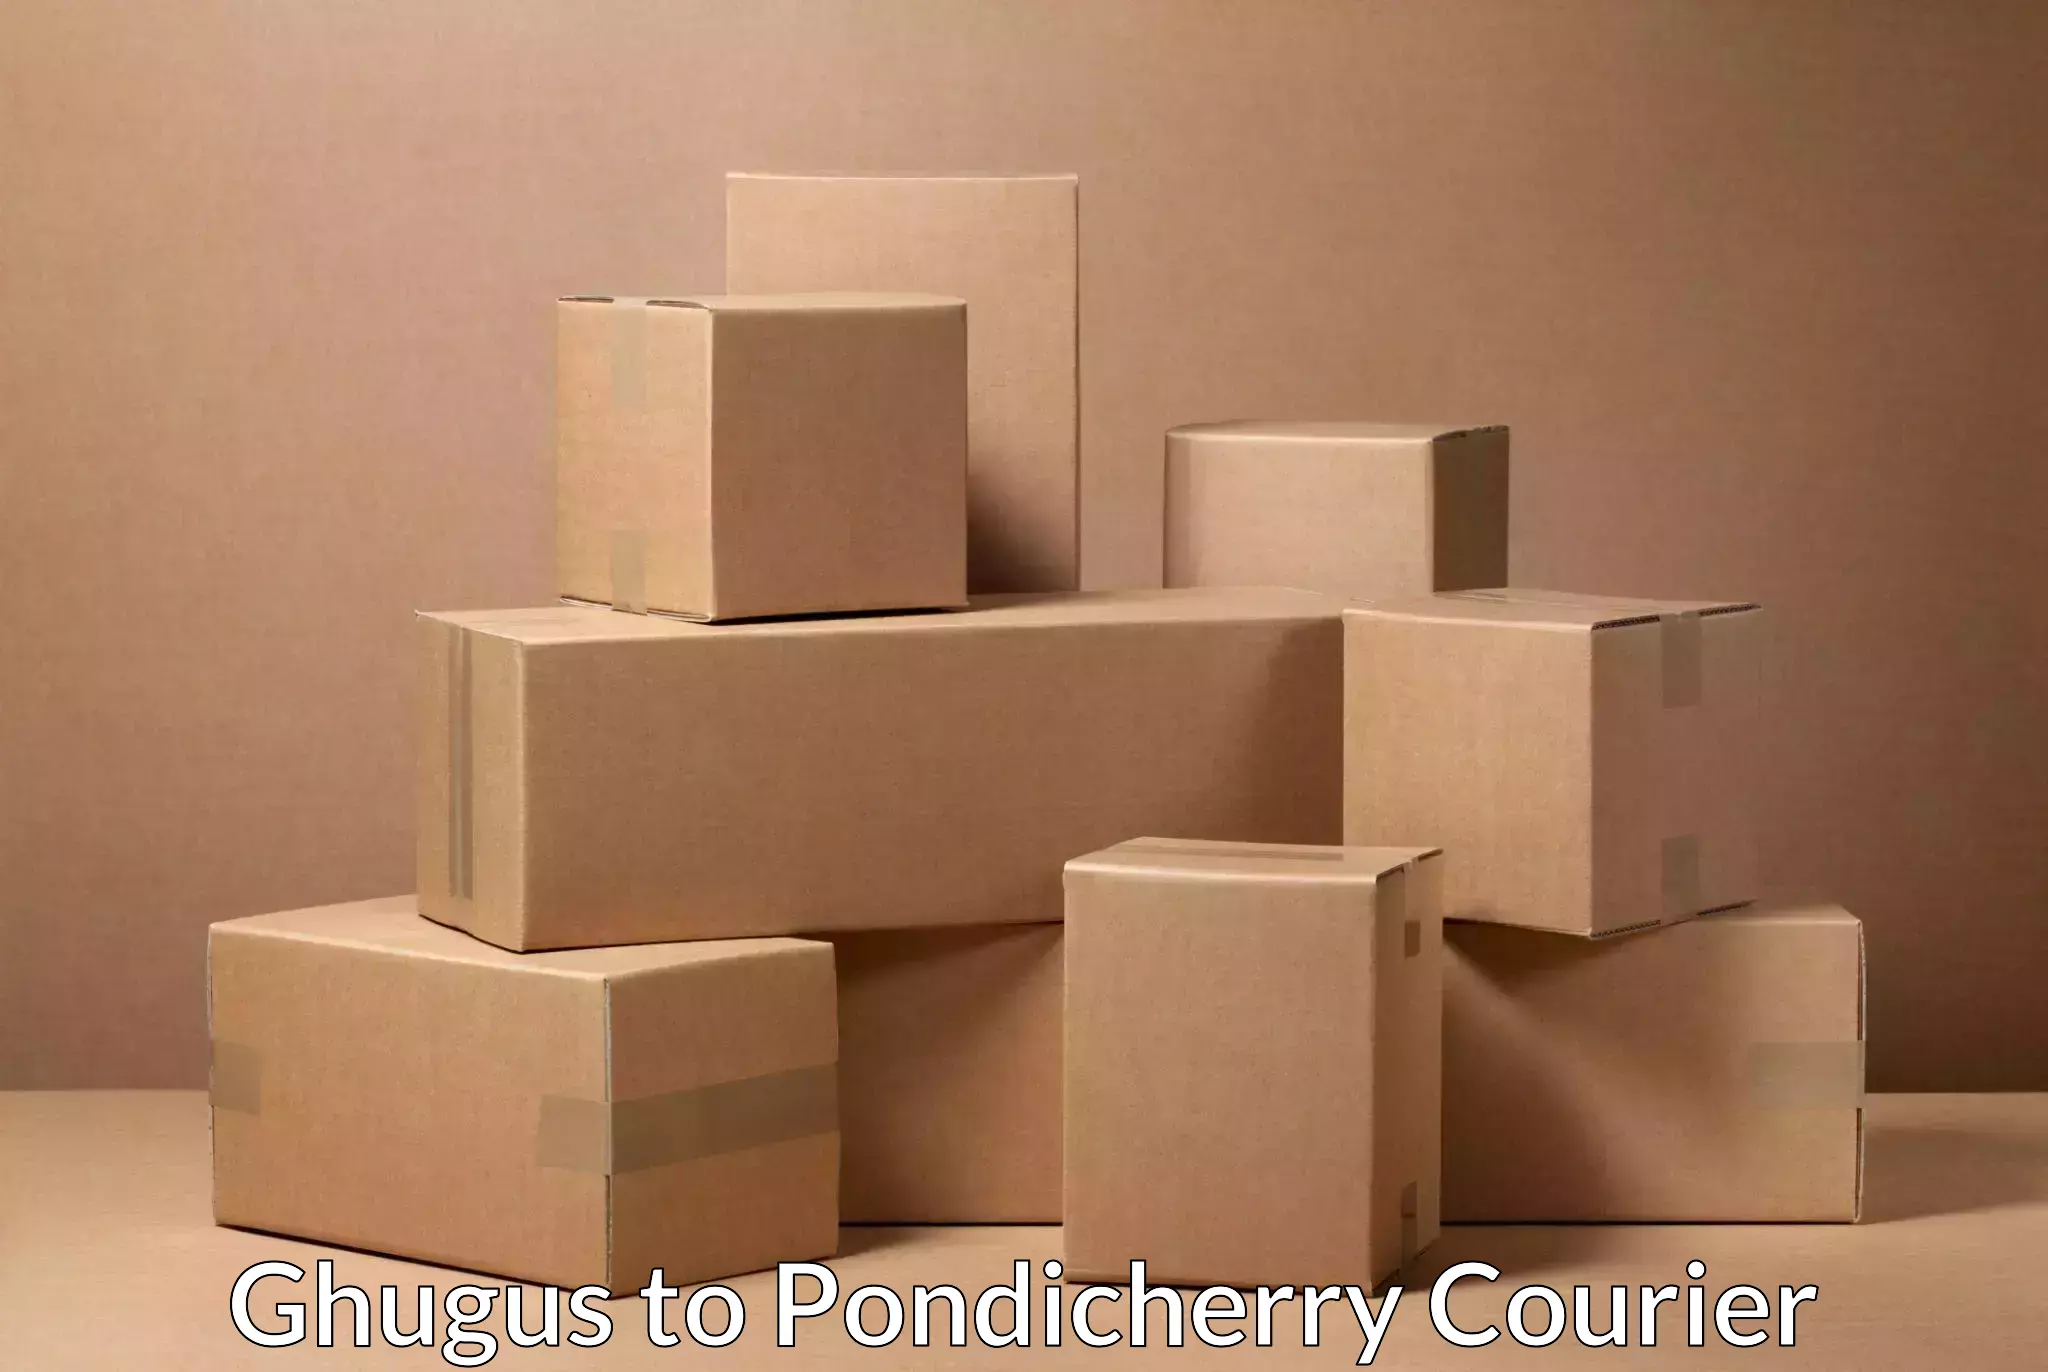 Nationwide shipping services Ghugus to Pondicherry